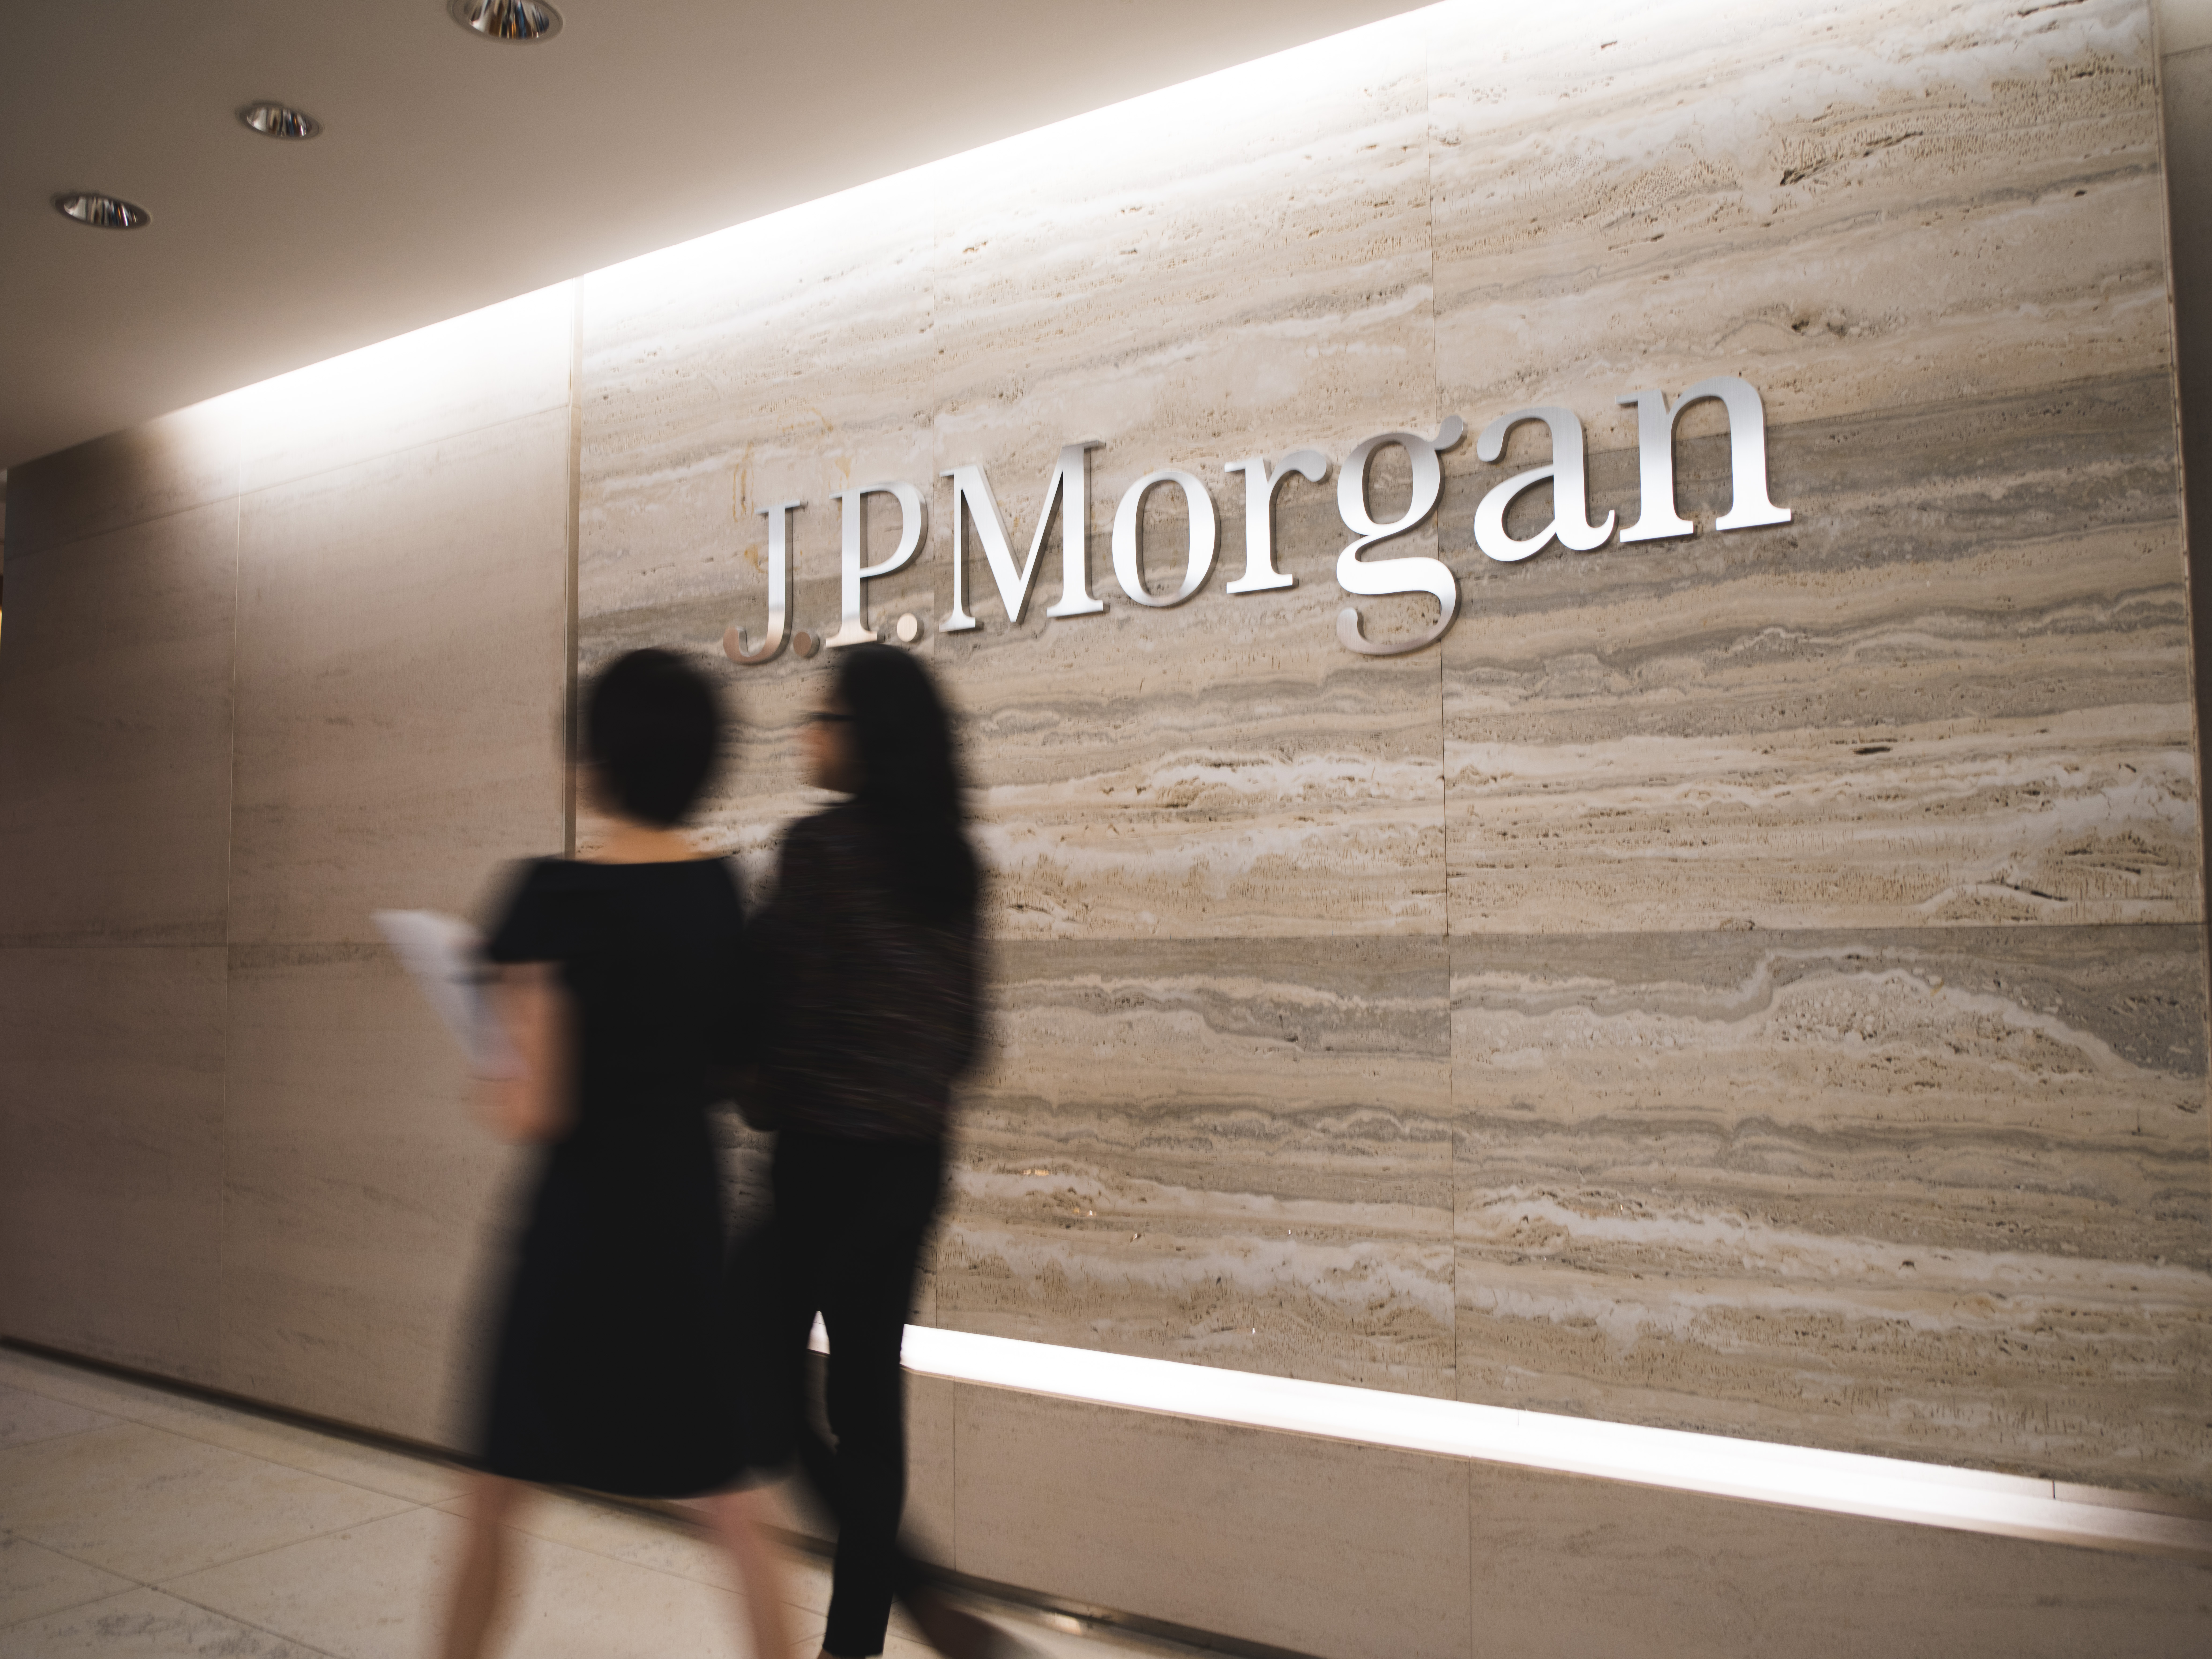 JP Morgan Chase exceeds one million UK customers as it marks first anniversary